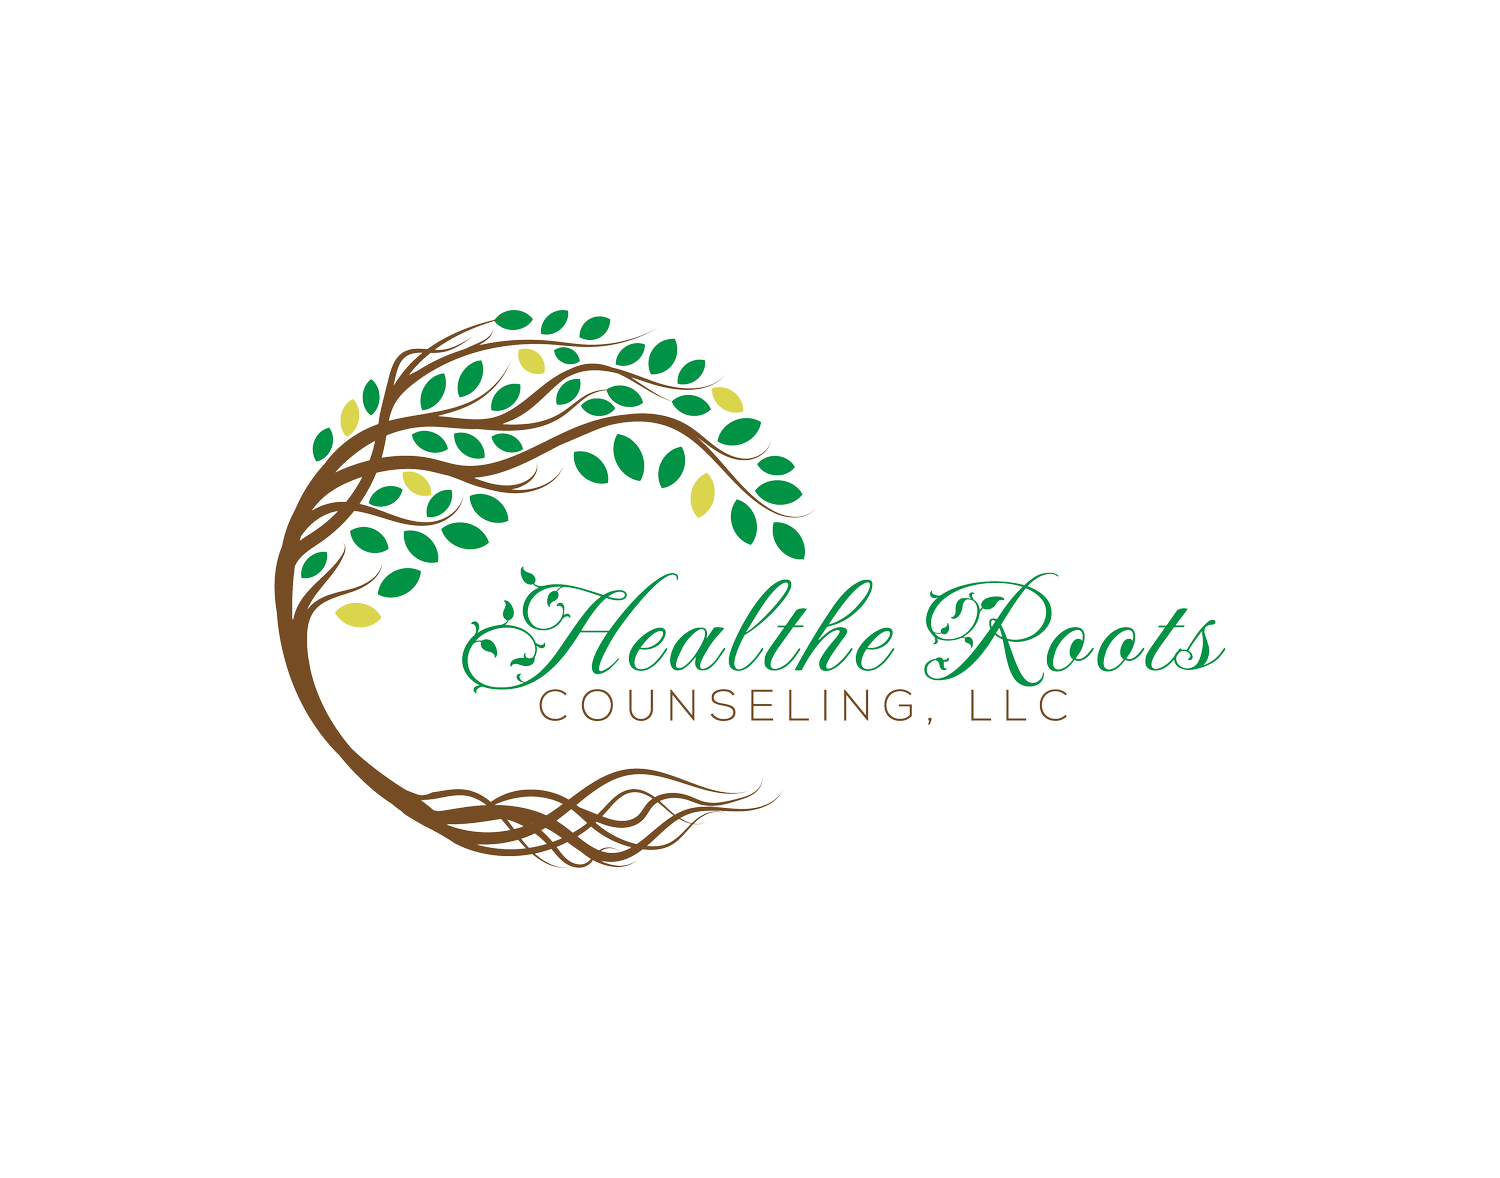 Healthe Roots Counseling, LLC